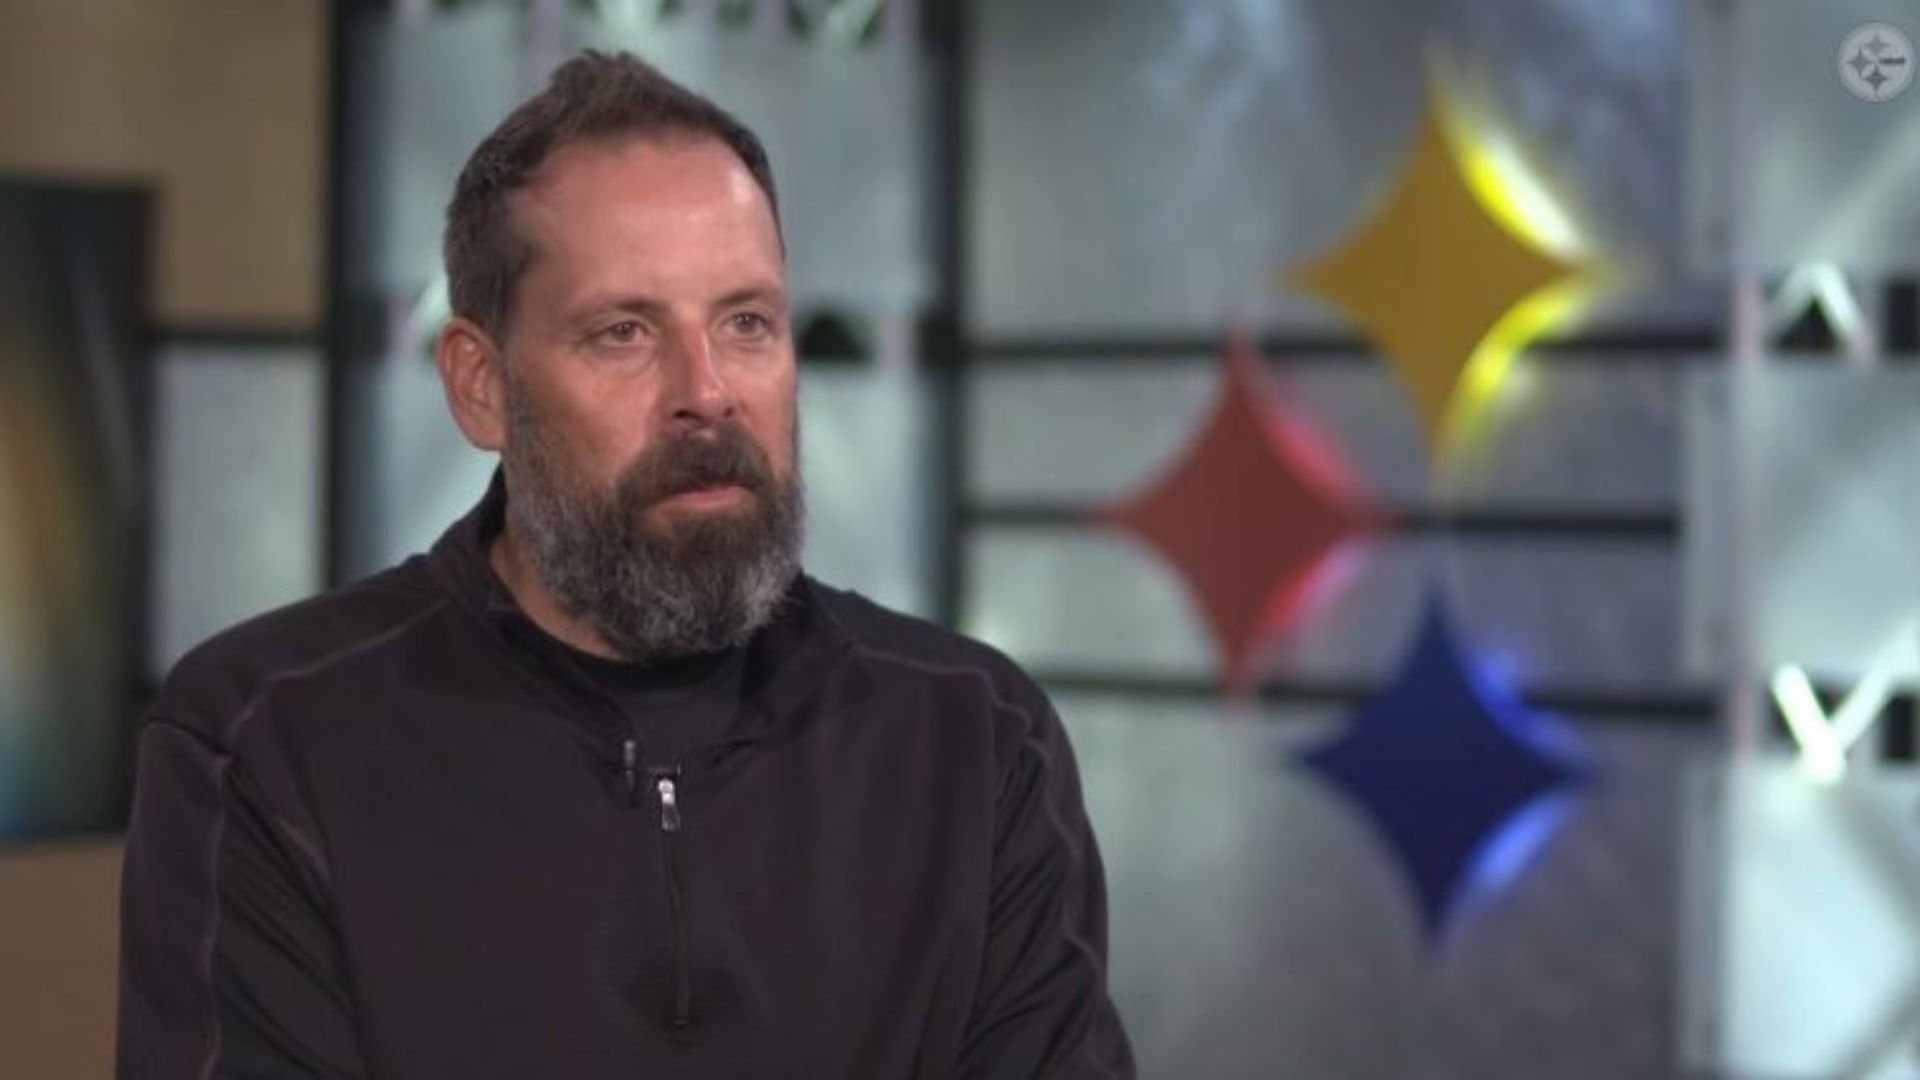 All About Todd Haley Wife: His Football Journey And The USFL Preview